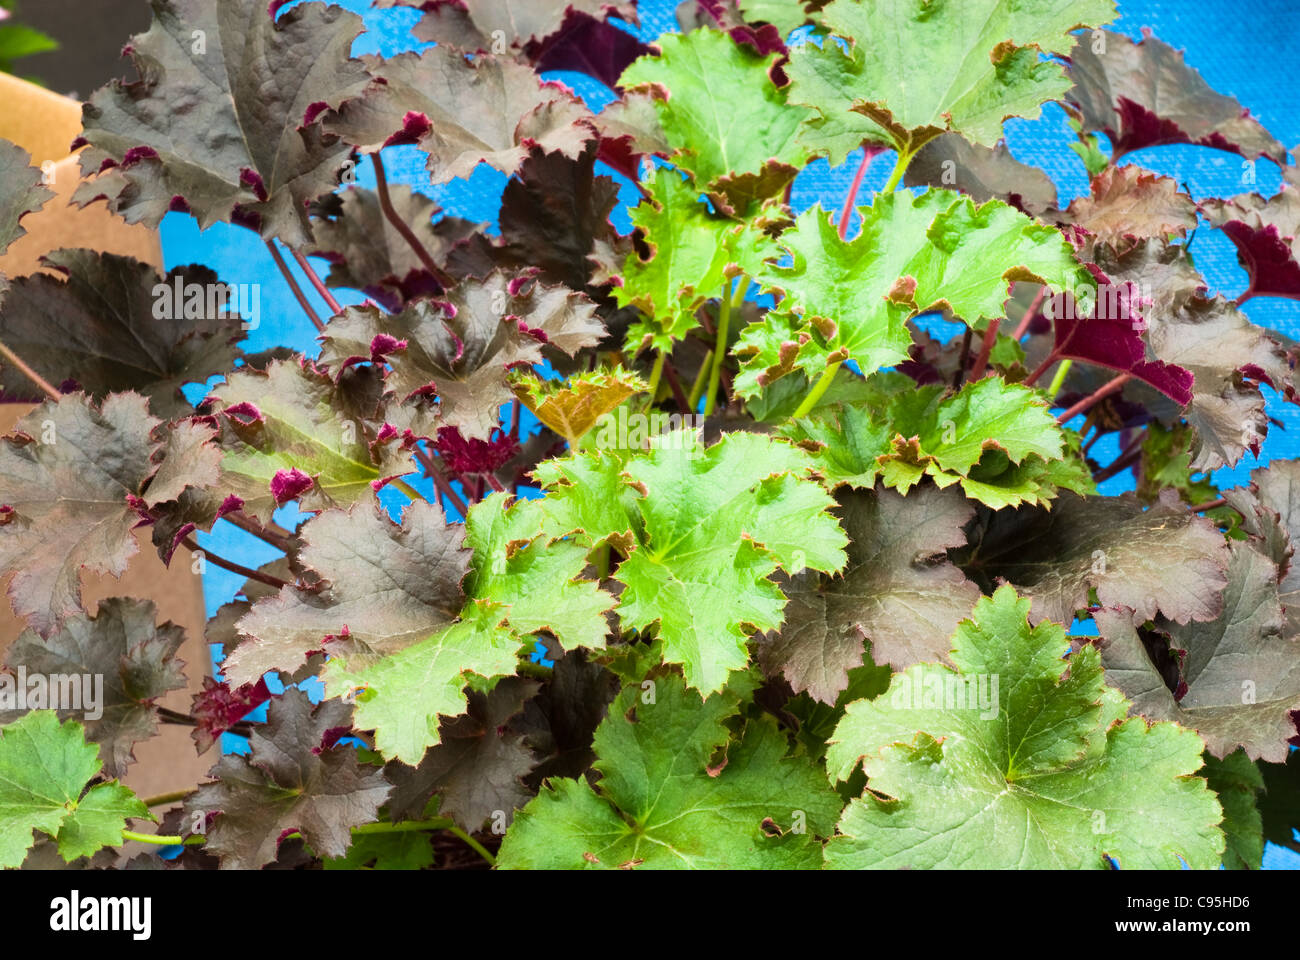 Heuchera Fifty Fifty perennial foliage plant with deeply lobed green and purple mixed colors leaves changeable for shade garden Stock Photo